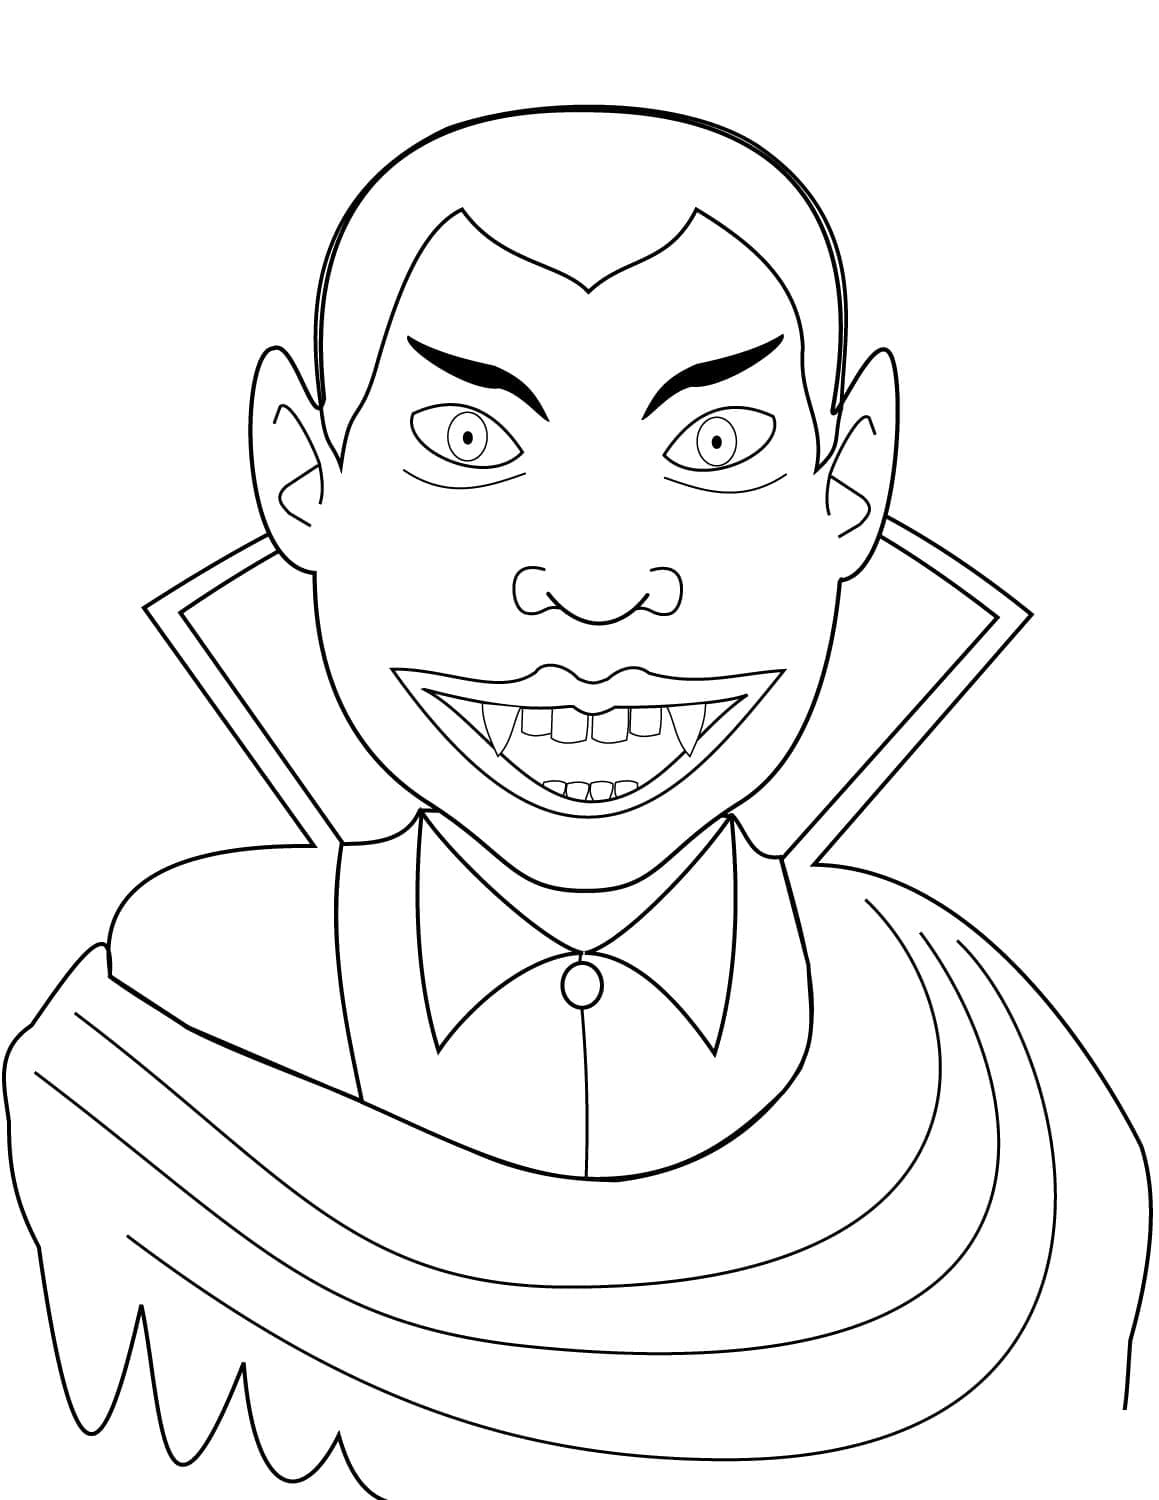 Vampire Imprimable coloring page